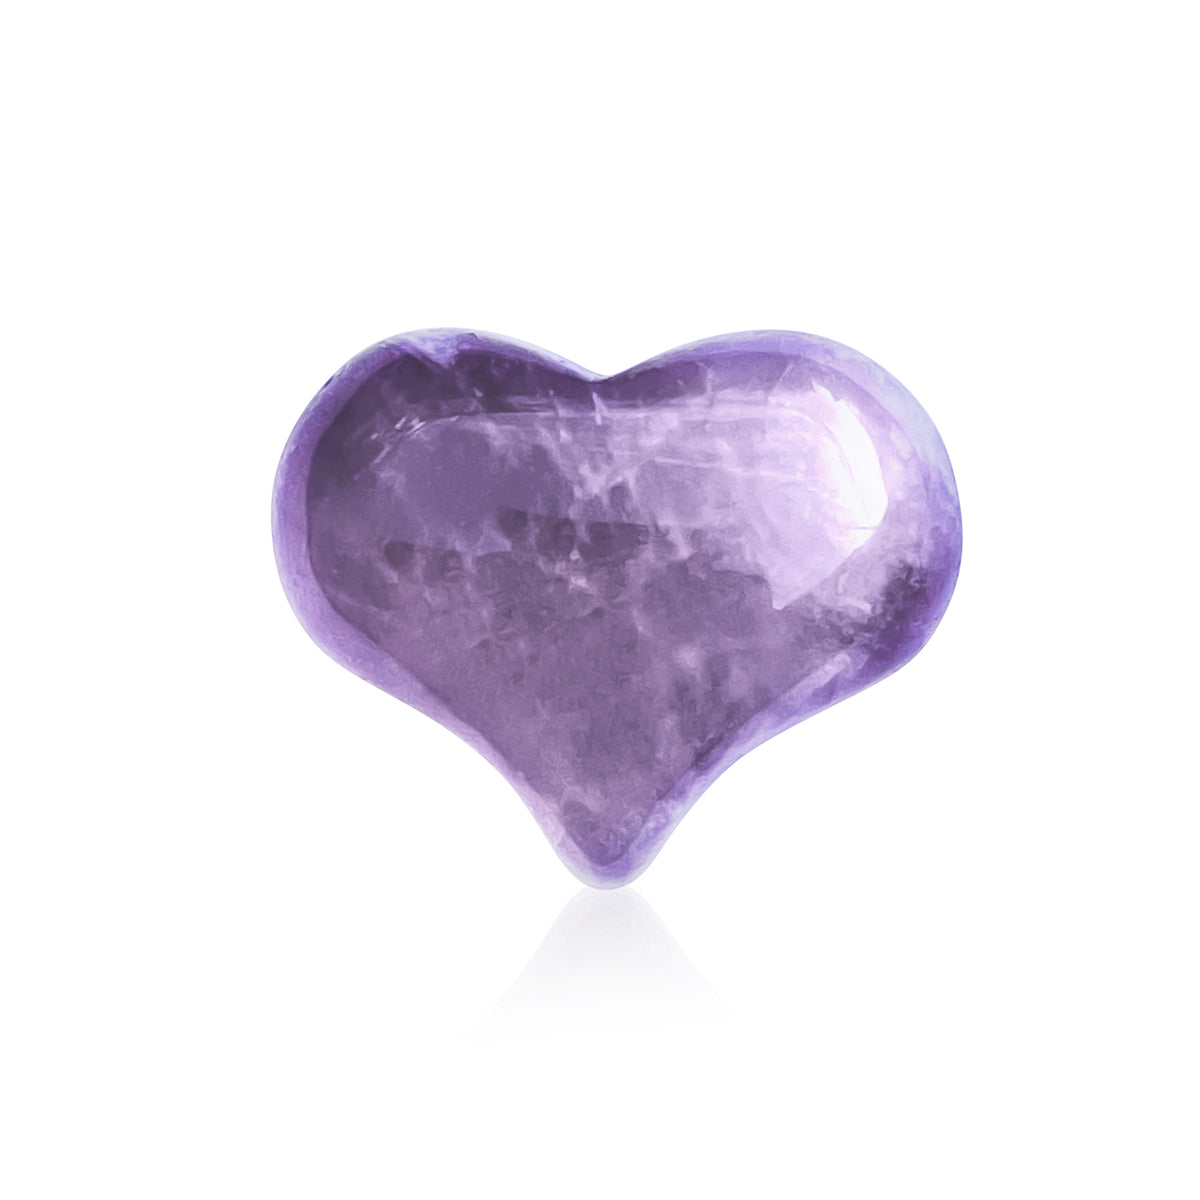 Unique and genuine Amethyst Heart Shaped Healing Gemstone for Calming Emotions